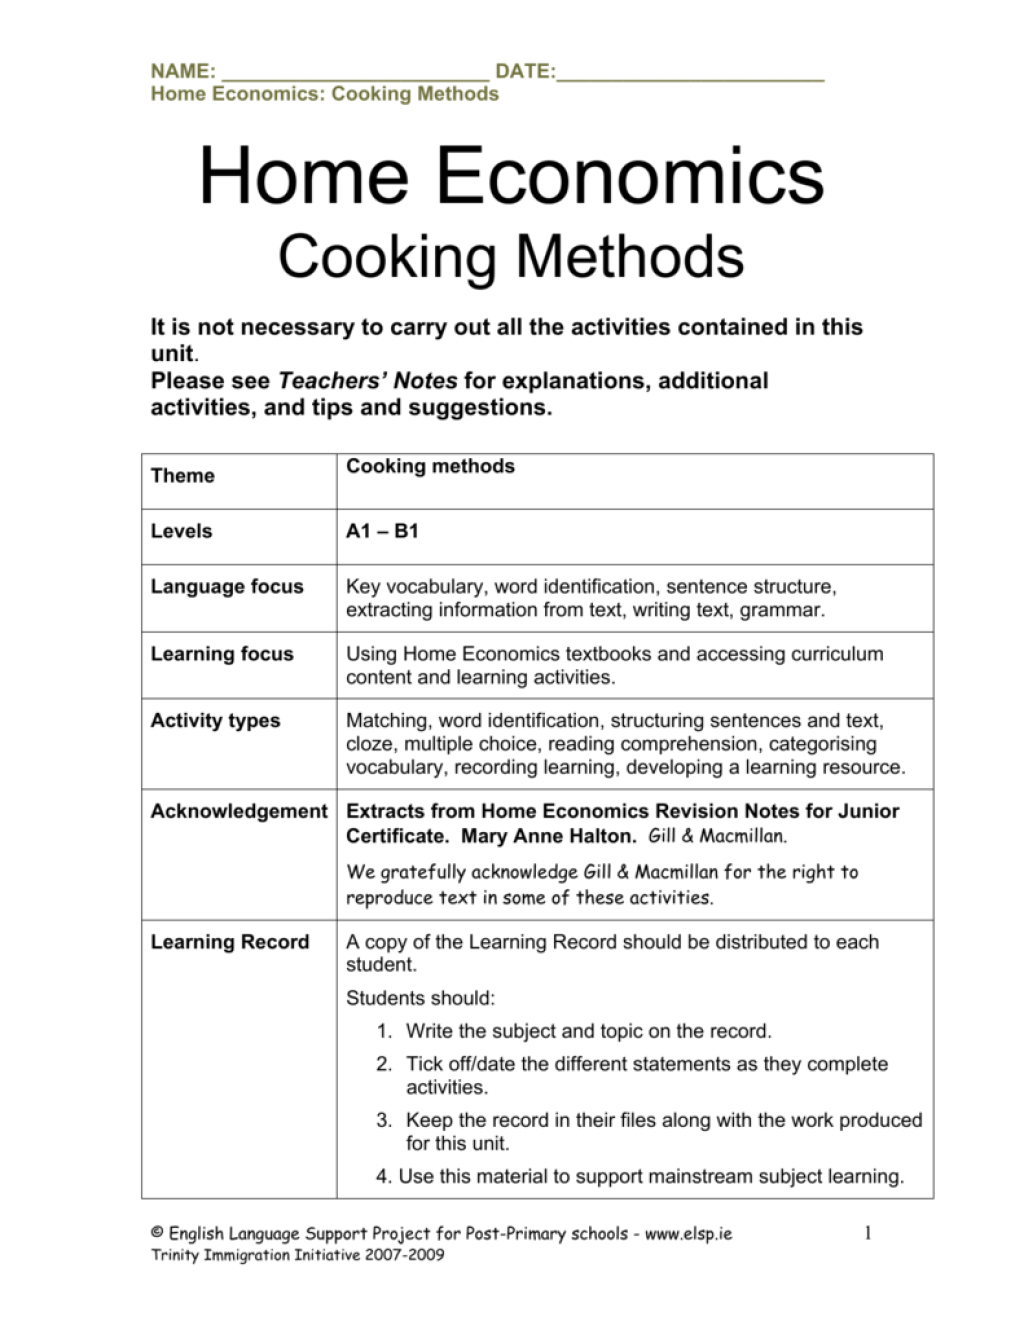 cooking method home economic primary four - Home Economics: Cooking Methods Home